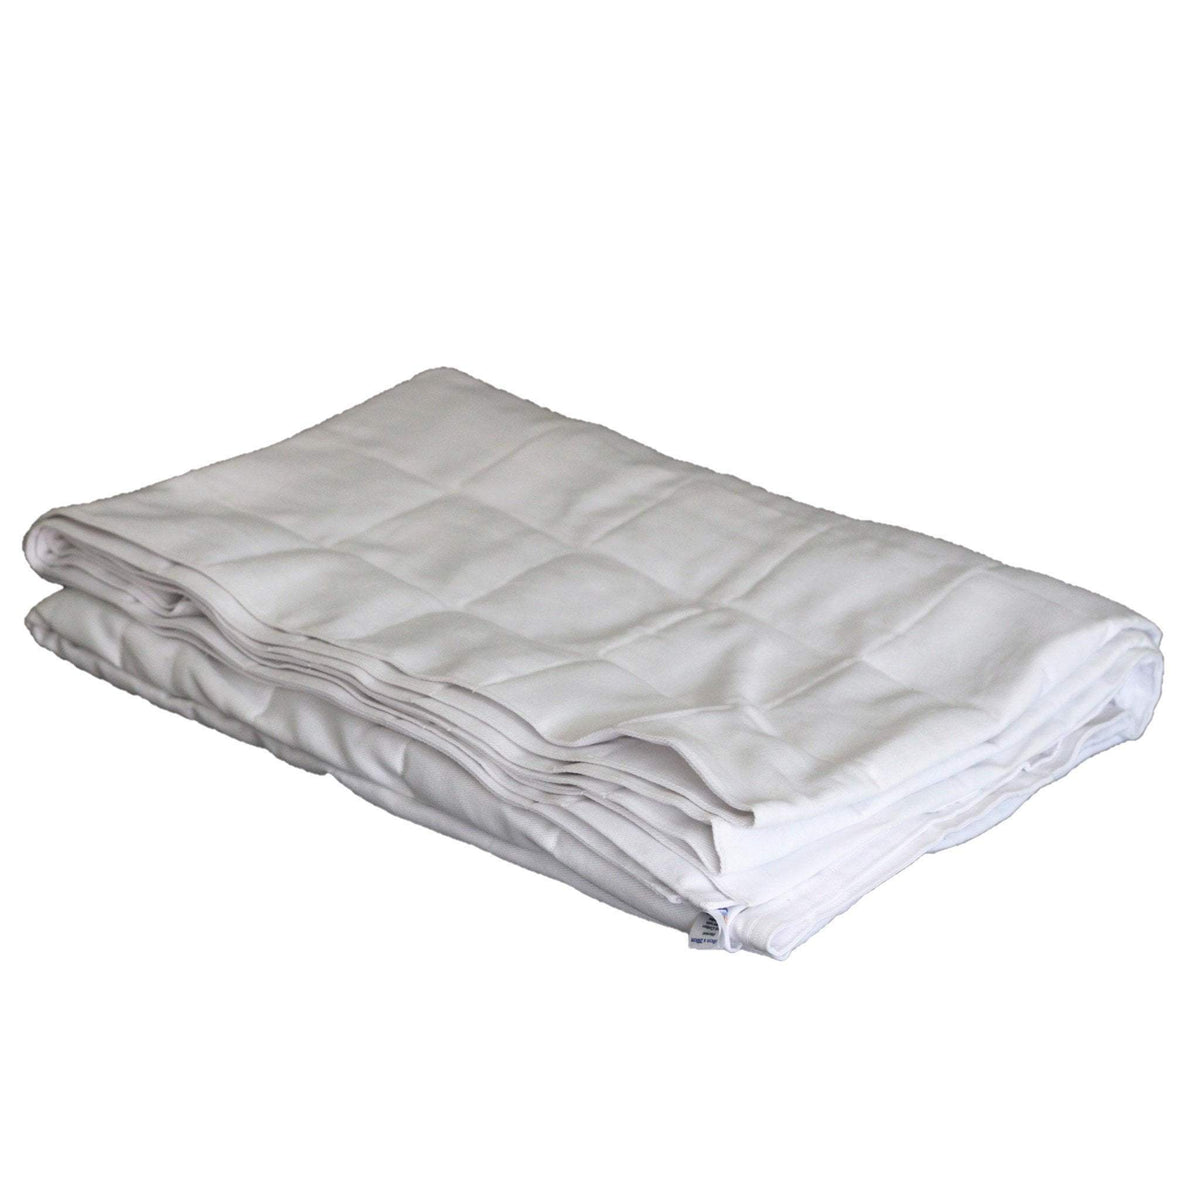 WHITE COTTON WEIGHTED SENSORY BLANKET THERAPY